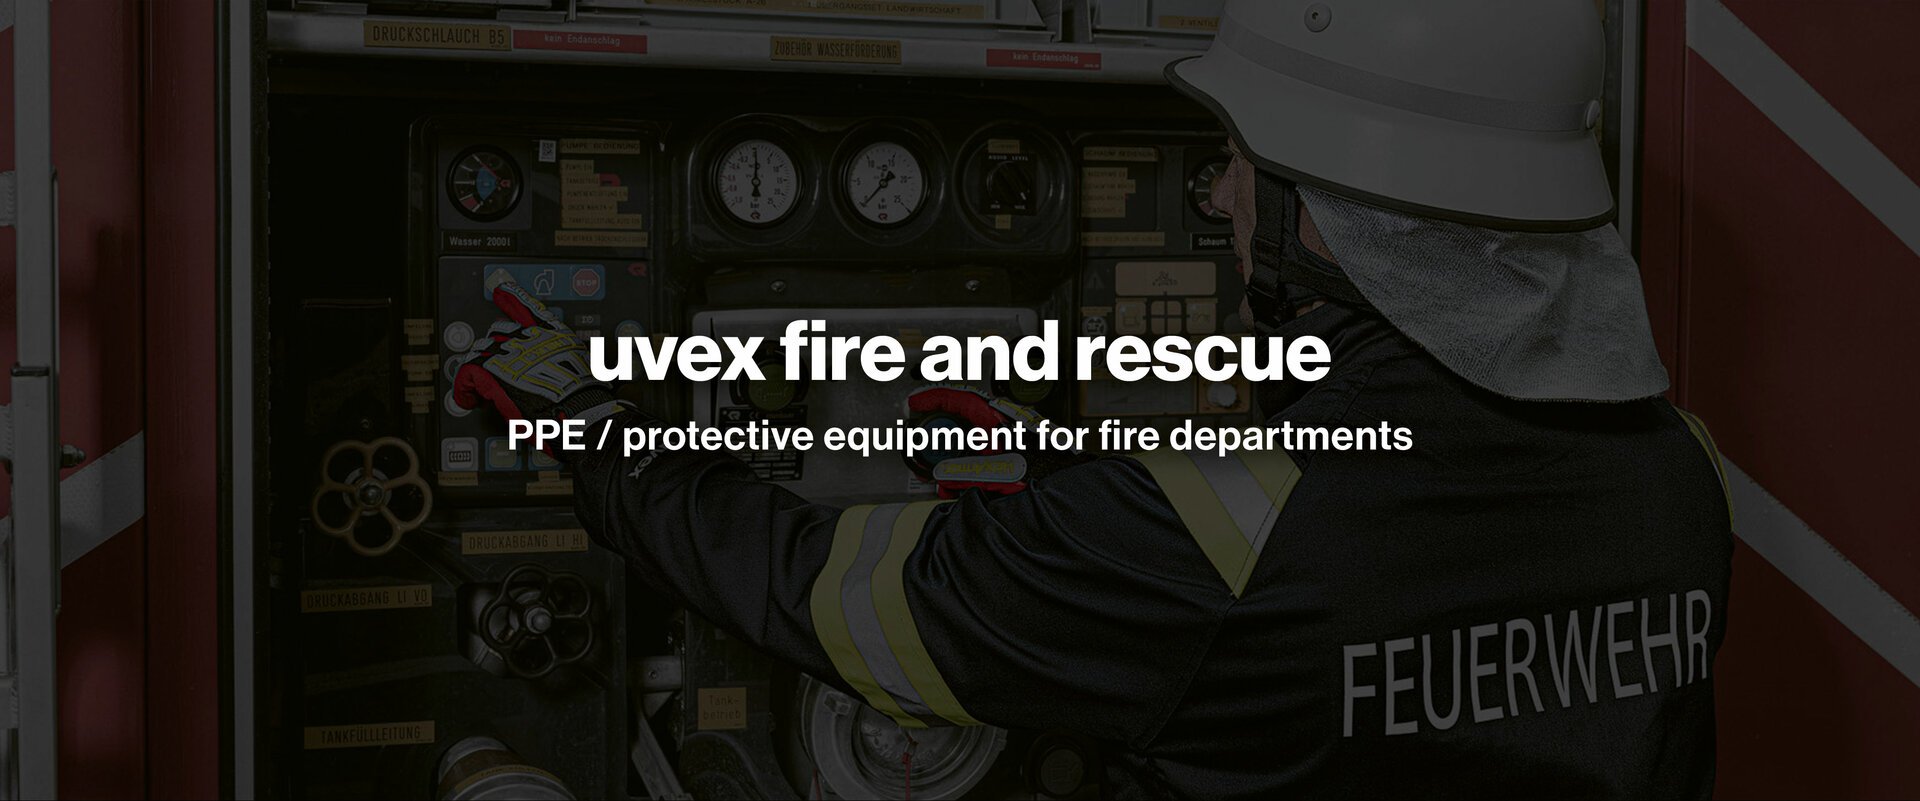 uvex protective equipment for firefighters and fire departments